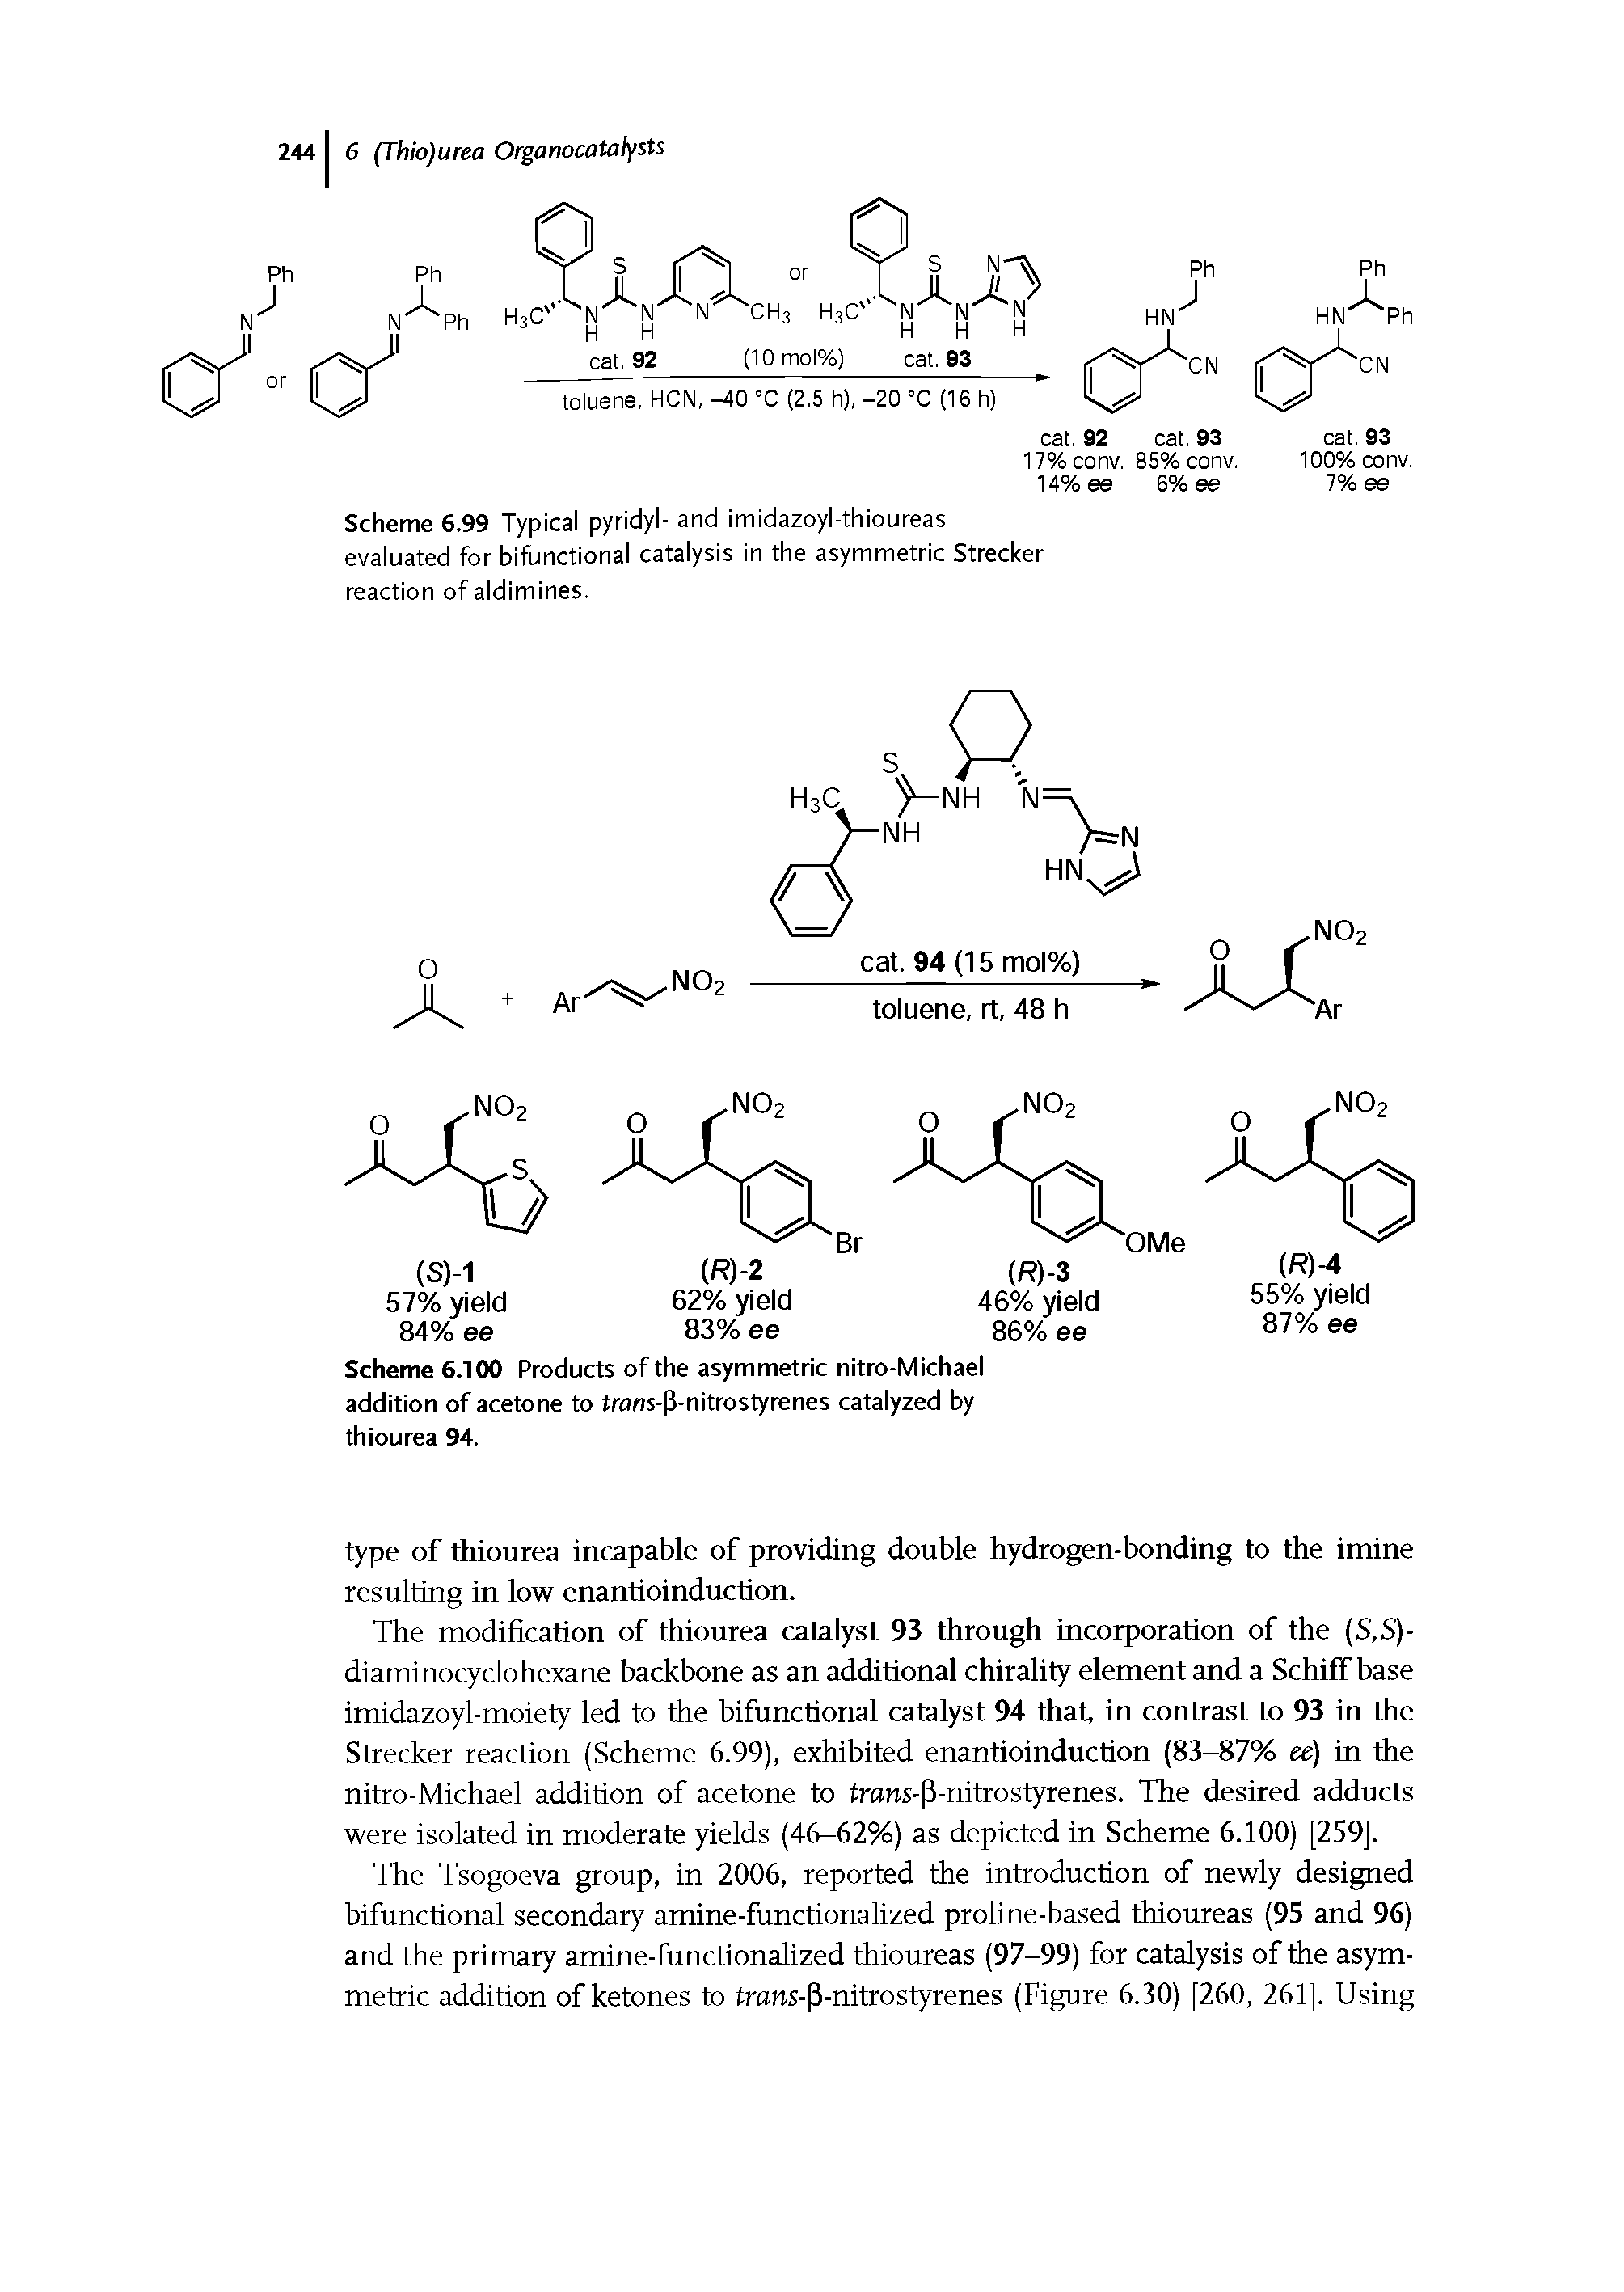 Scheme 6.100 Products of the asymmetric nitro-Michael addition of acetone to frans-P-nitrostyrenes catalyzed by thiourea 94.